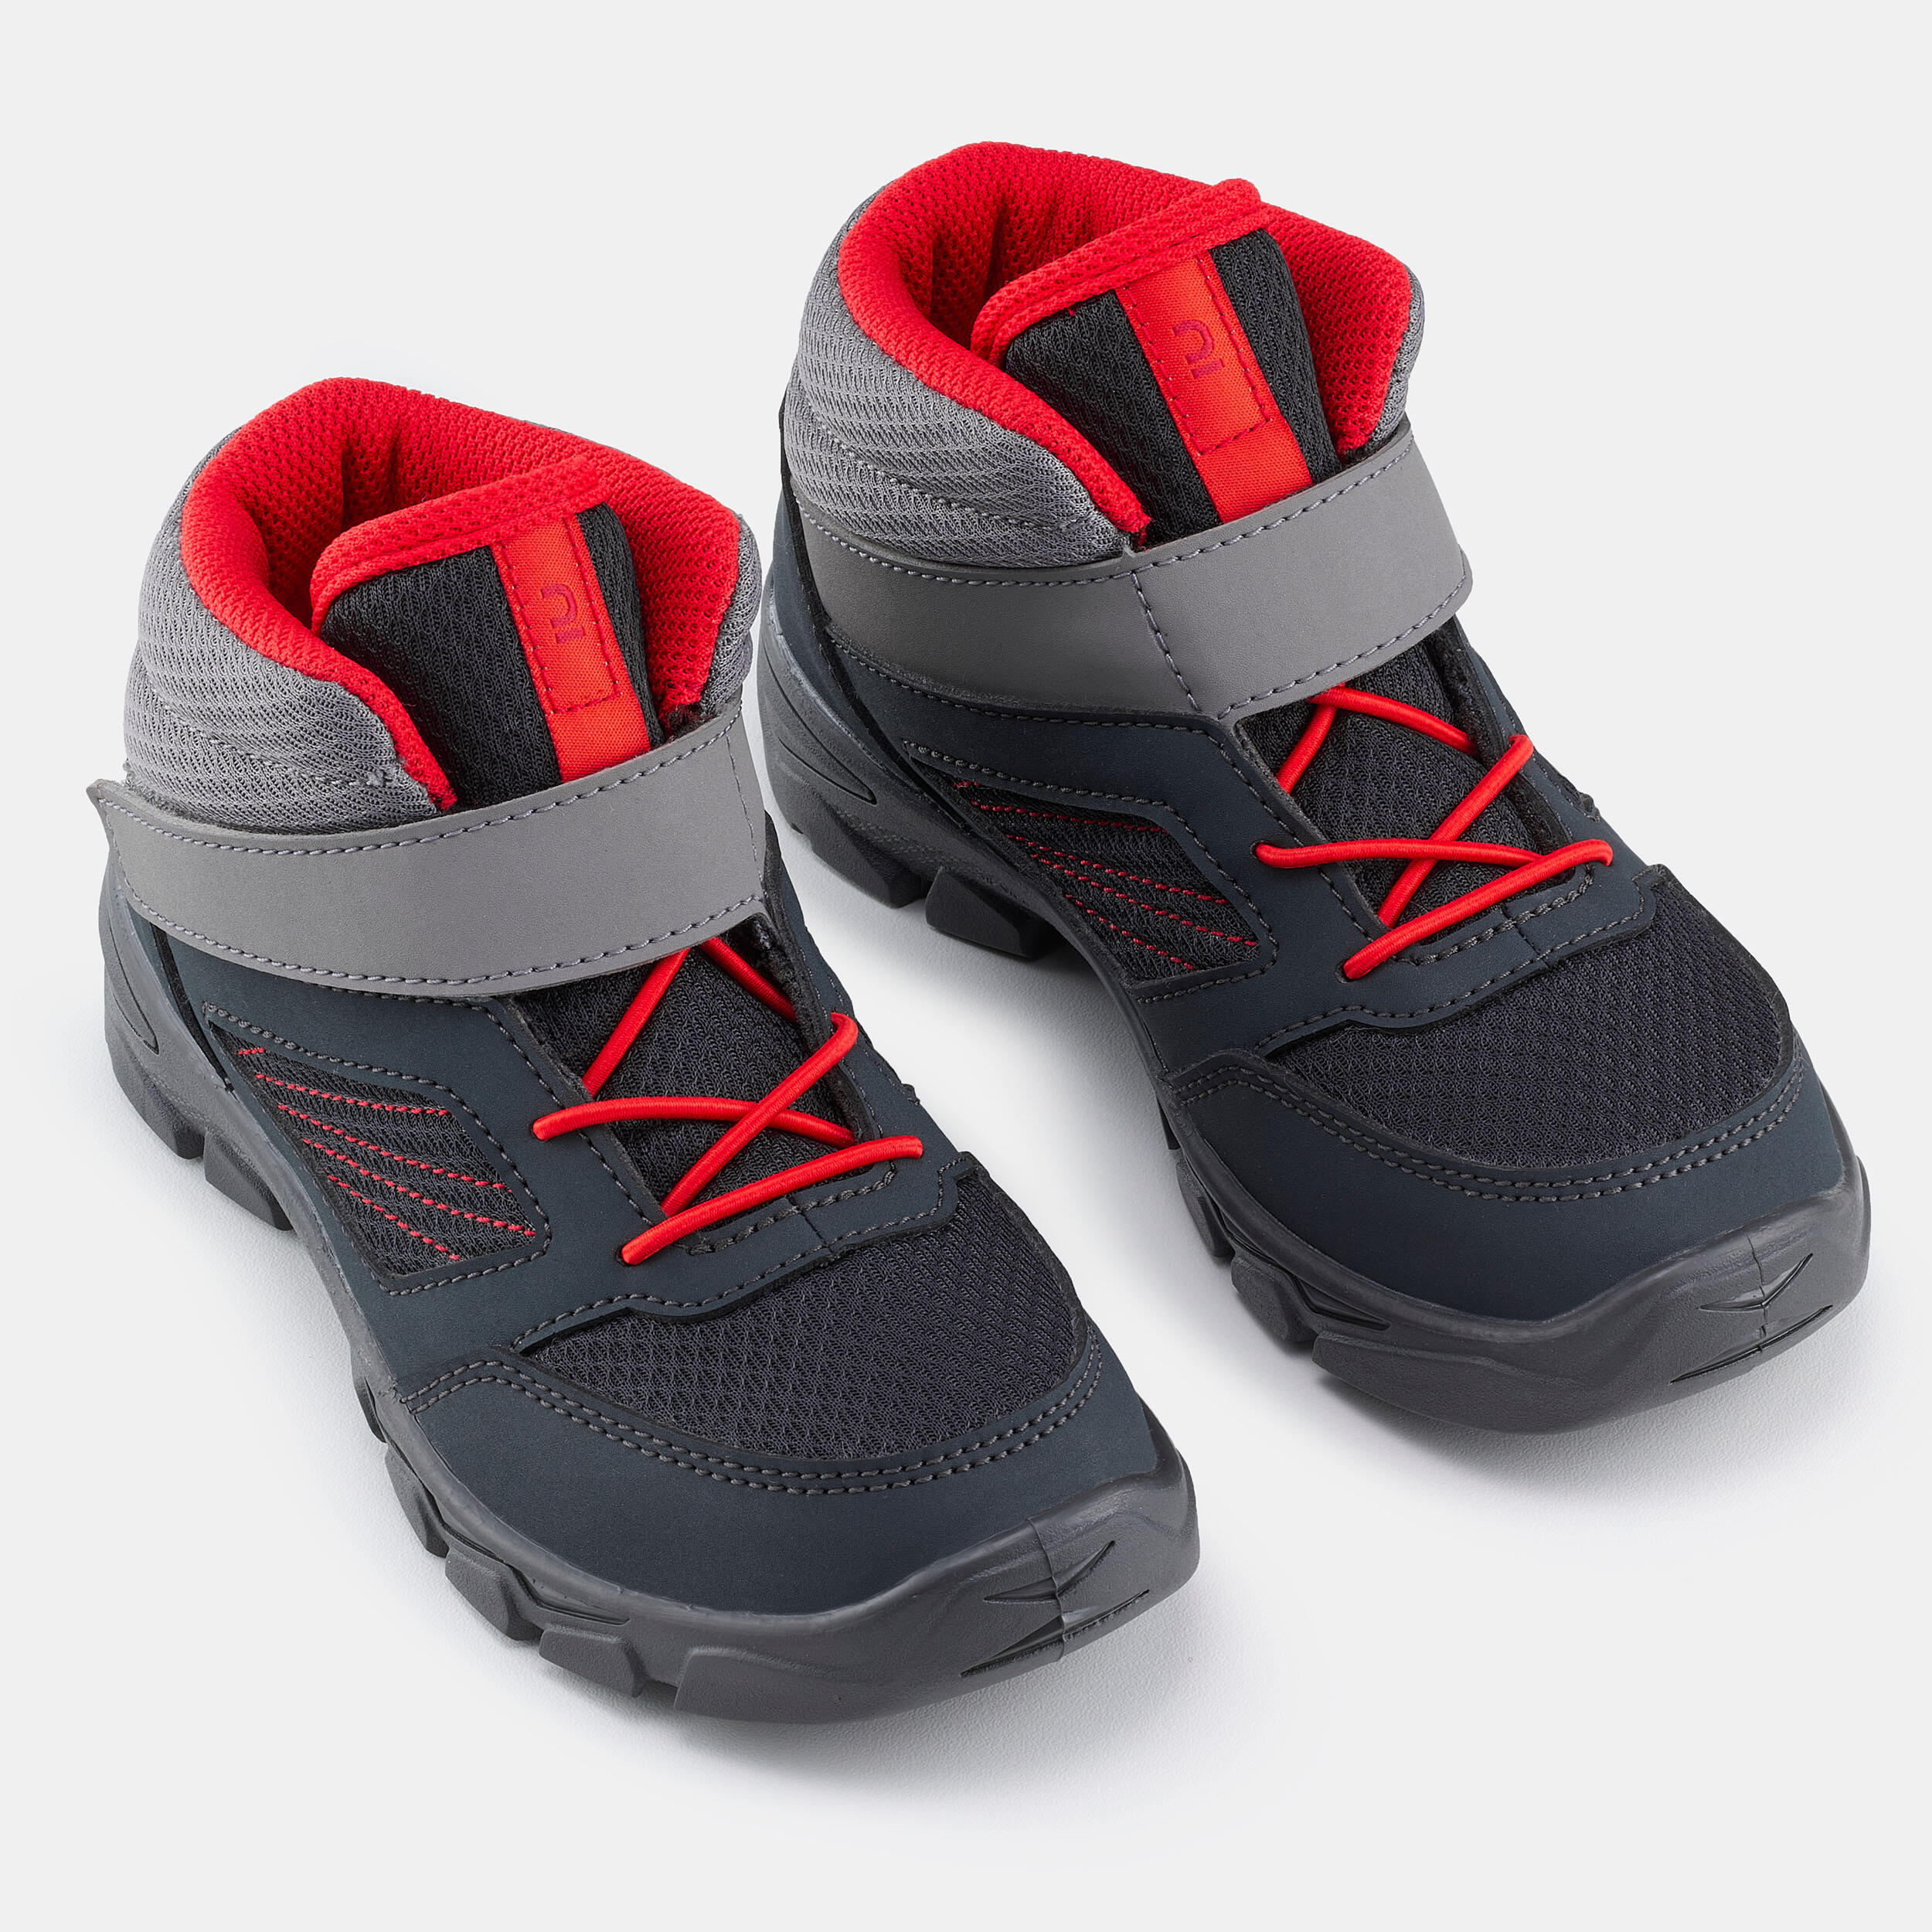 Kids' Hiking Boots - MH 100 Grey/Red - Carbon grey, Pewter, Bright red ...